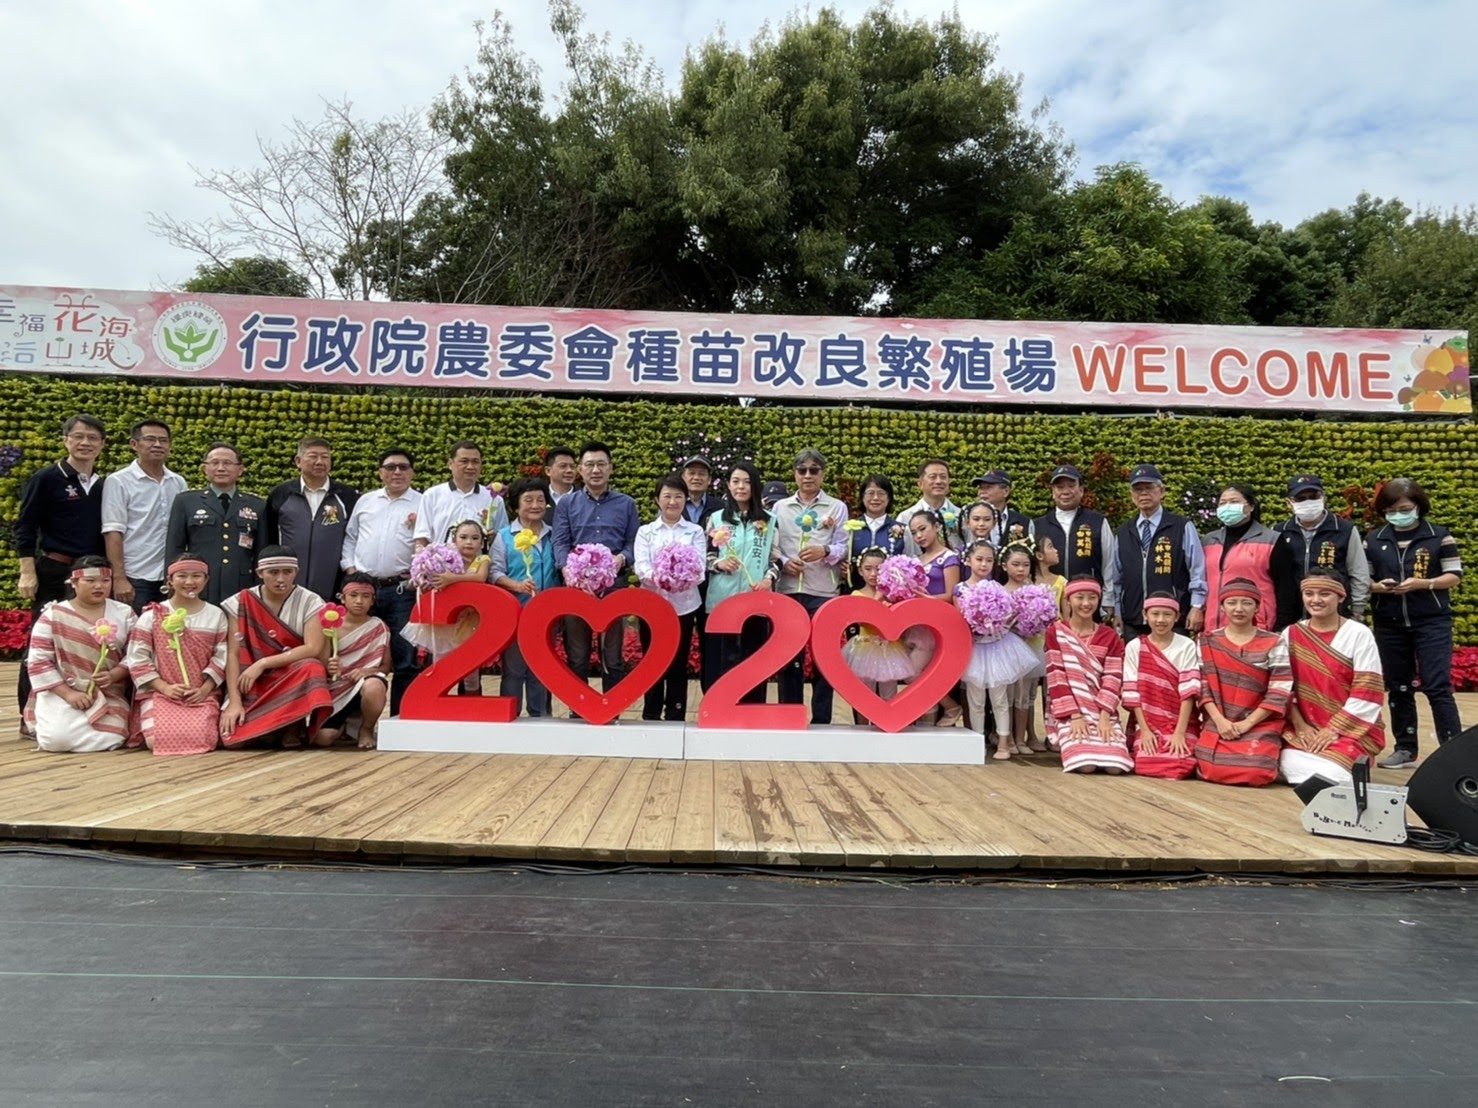 Honored guests assemble the large numbers “2020,” announcing the formal opening of the Sea of Flowers in Xinshe activity.